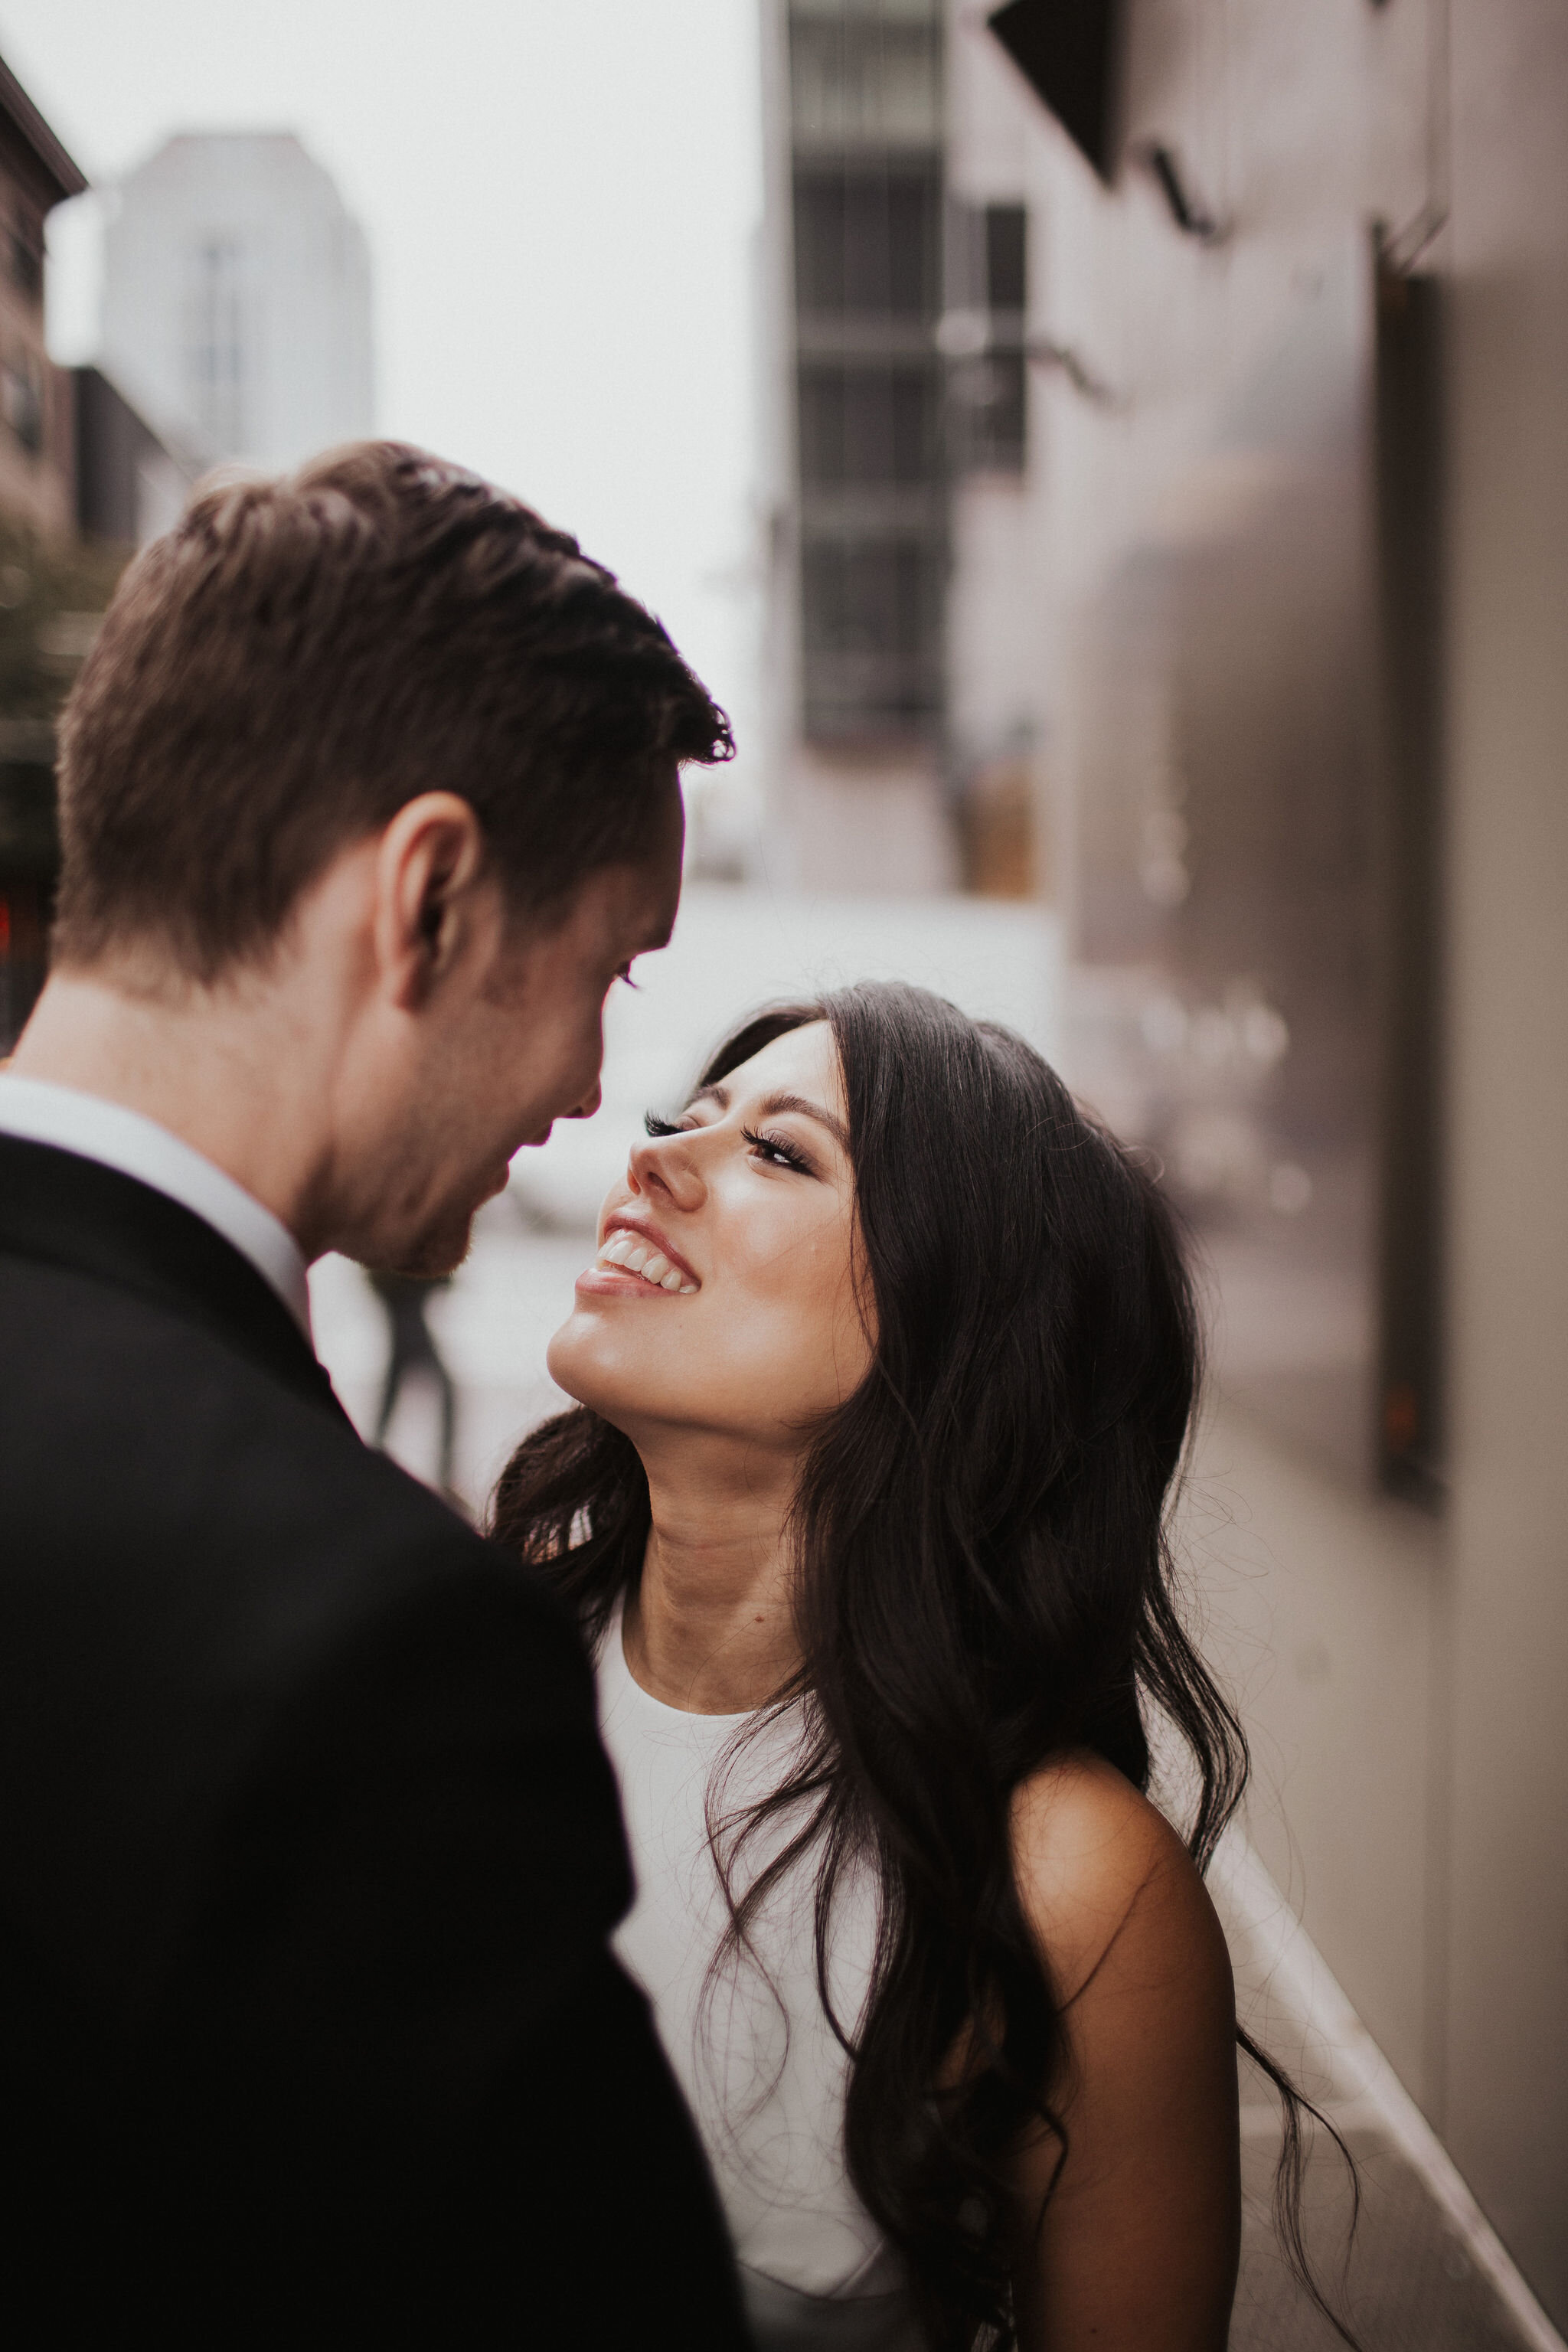 Sykes-couples-session-august-muse-images-seattle-wedding-photographer-within-sodo-four-seasons-122.jpg